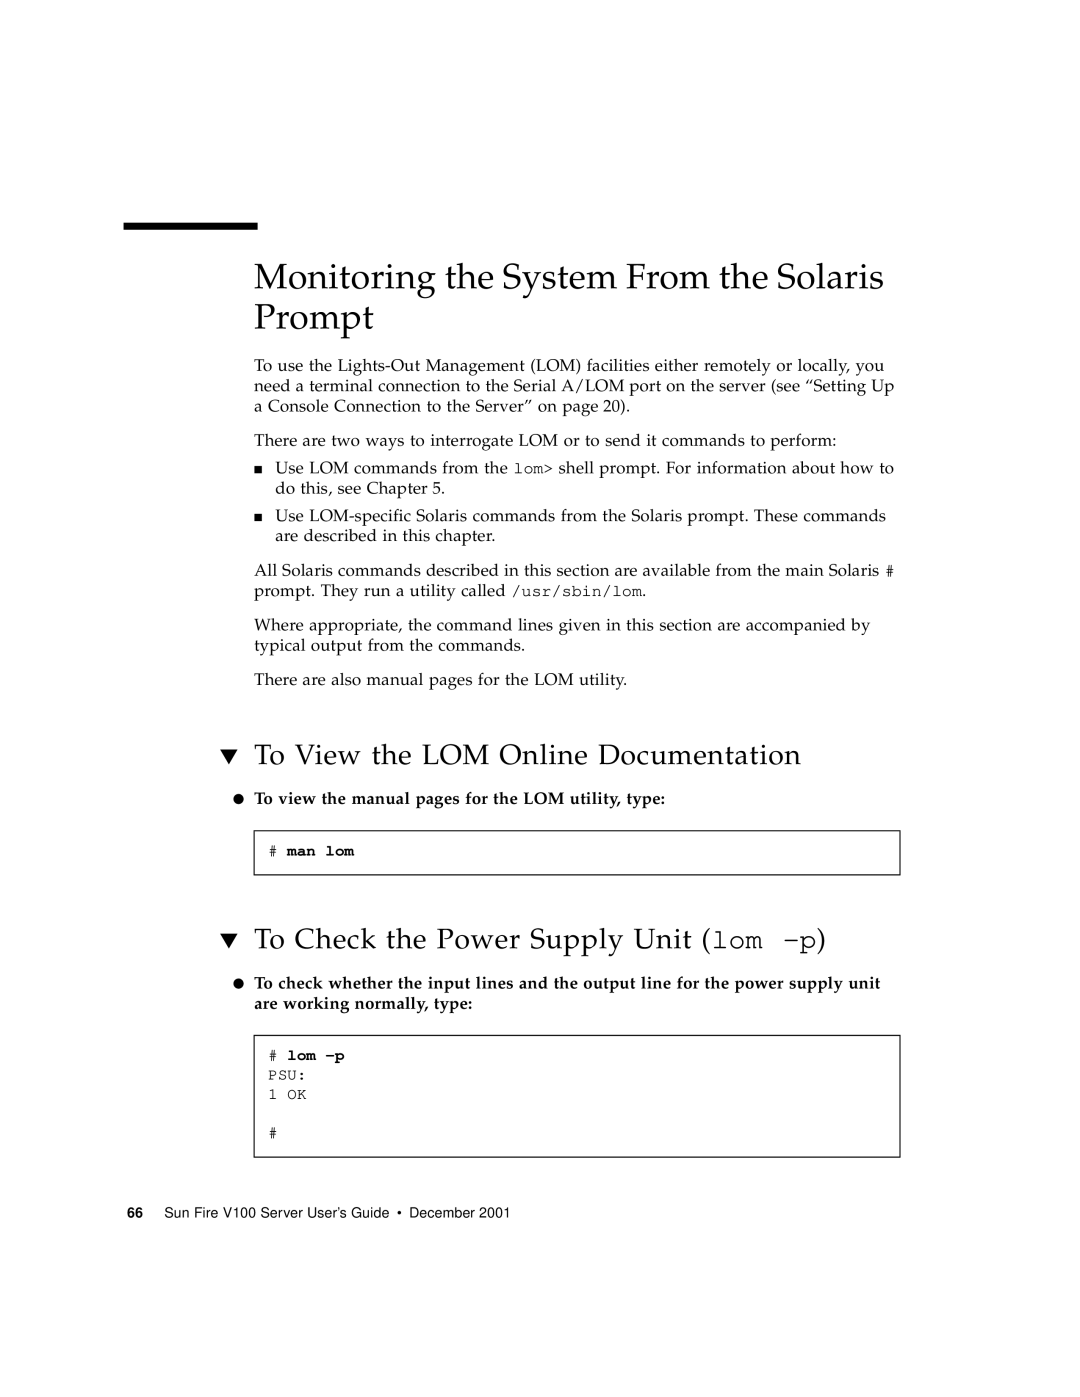 Sun Microsystems Sun Fire V100 manual Monitoring the System From the Solaris Prompt, To View the LOM Online Documentation 